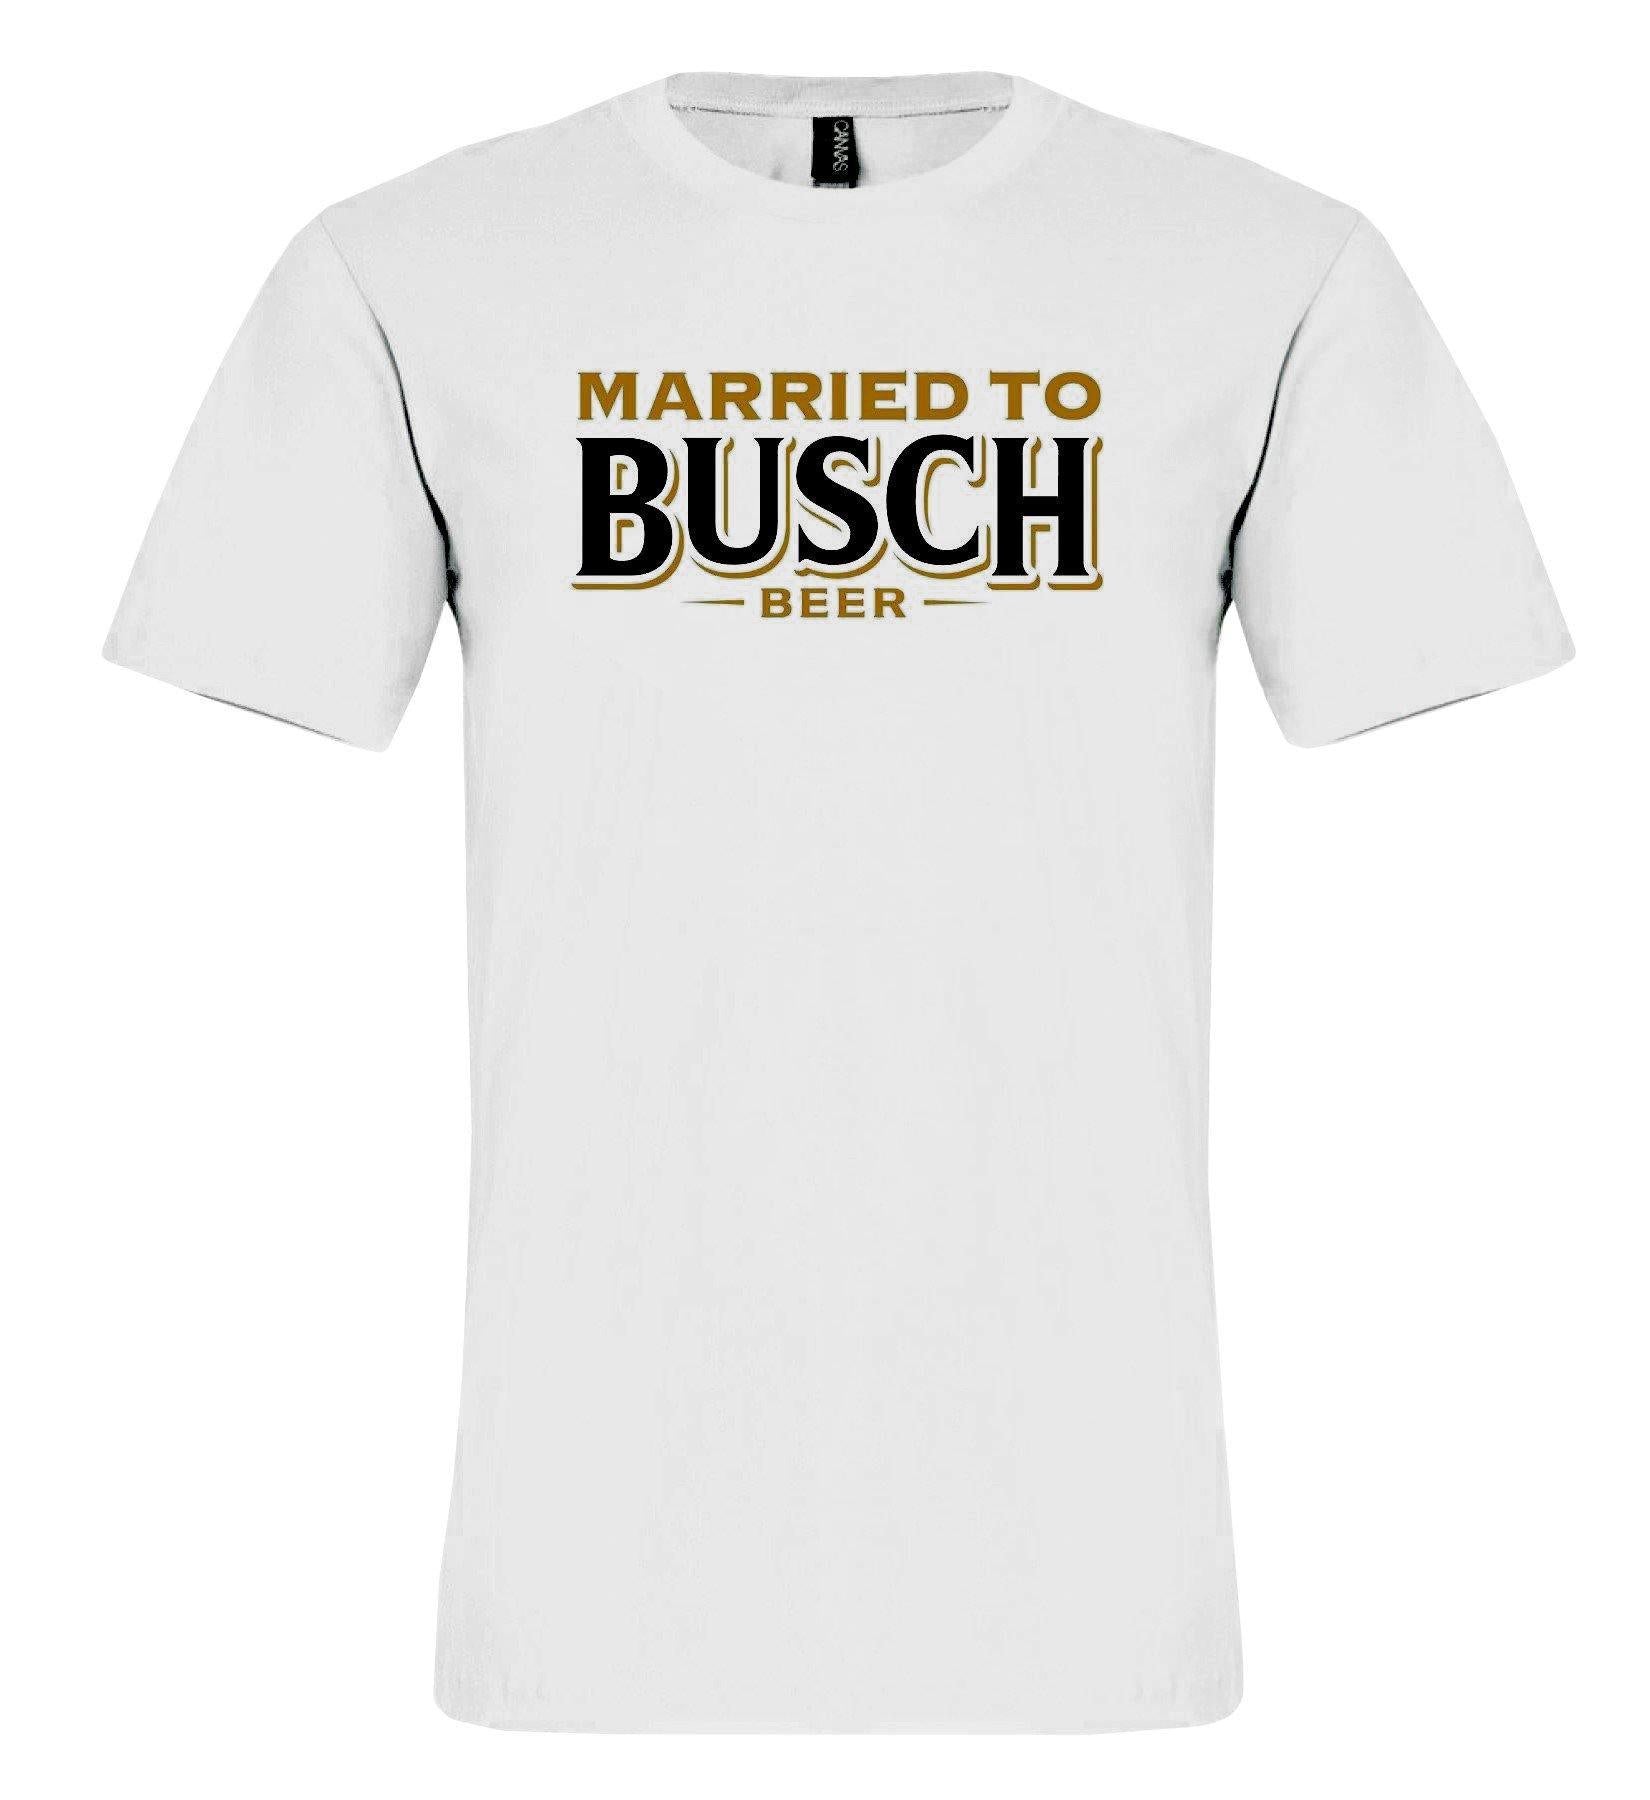 white t shirt with married to busch beer in busch's font across the chest. "Married to" and "beer" is in gold and "Busch" is in black.